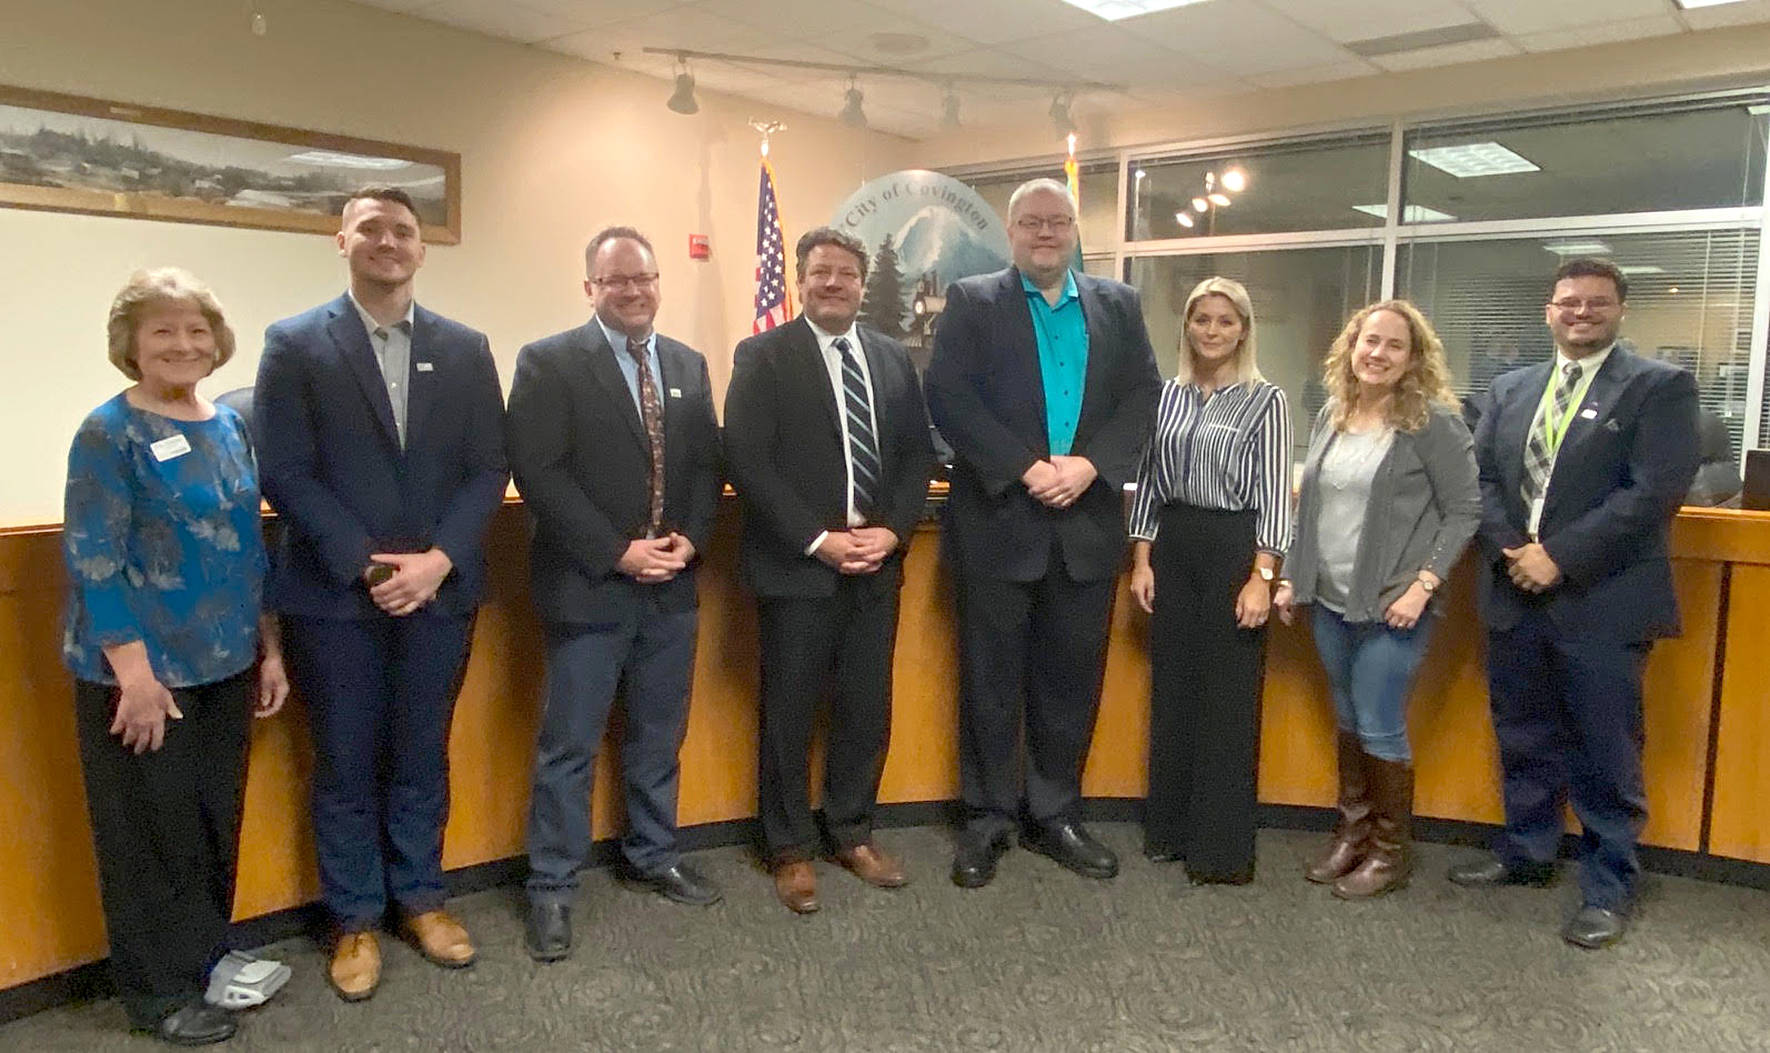 The Covington City Council from left to right; Fran McGregor Hollums, Jared Koukal, Sean Smith, Jeff Wagner, Kristina Soltys, Jennifer Harjehausen and Joseph Cimaomo Jr. Photo by Karla Slate.